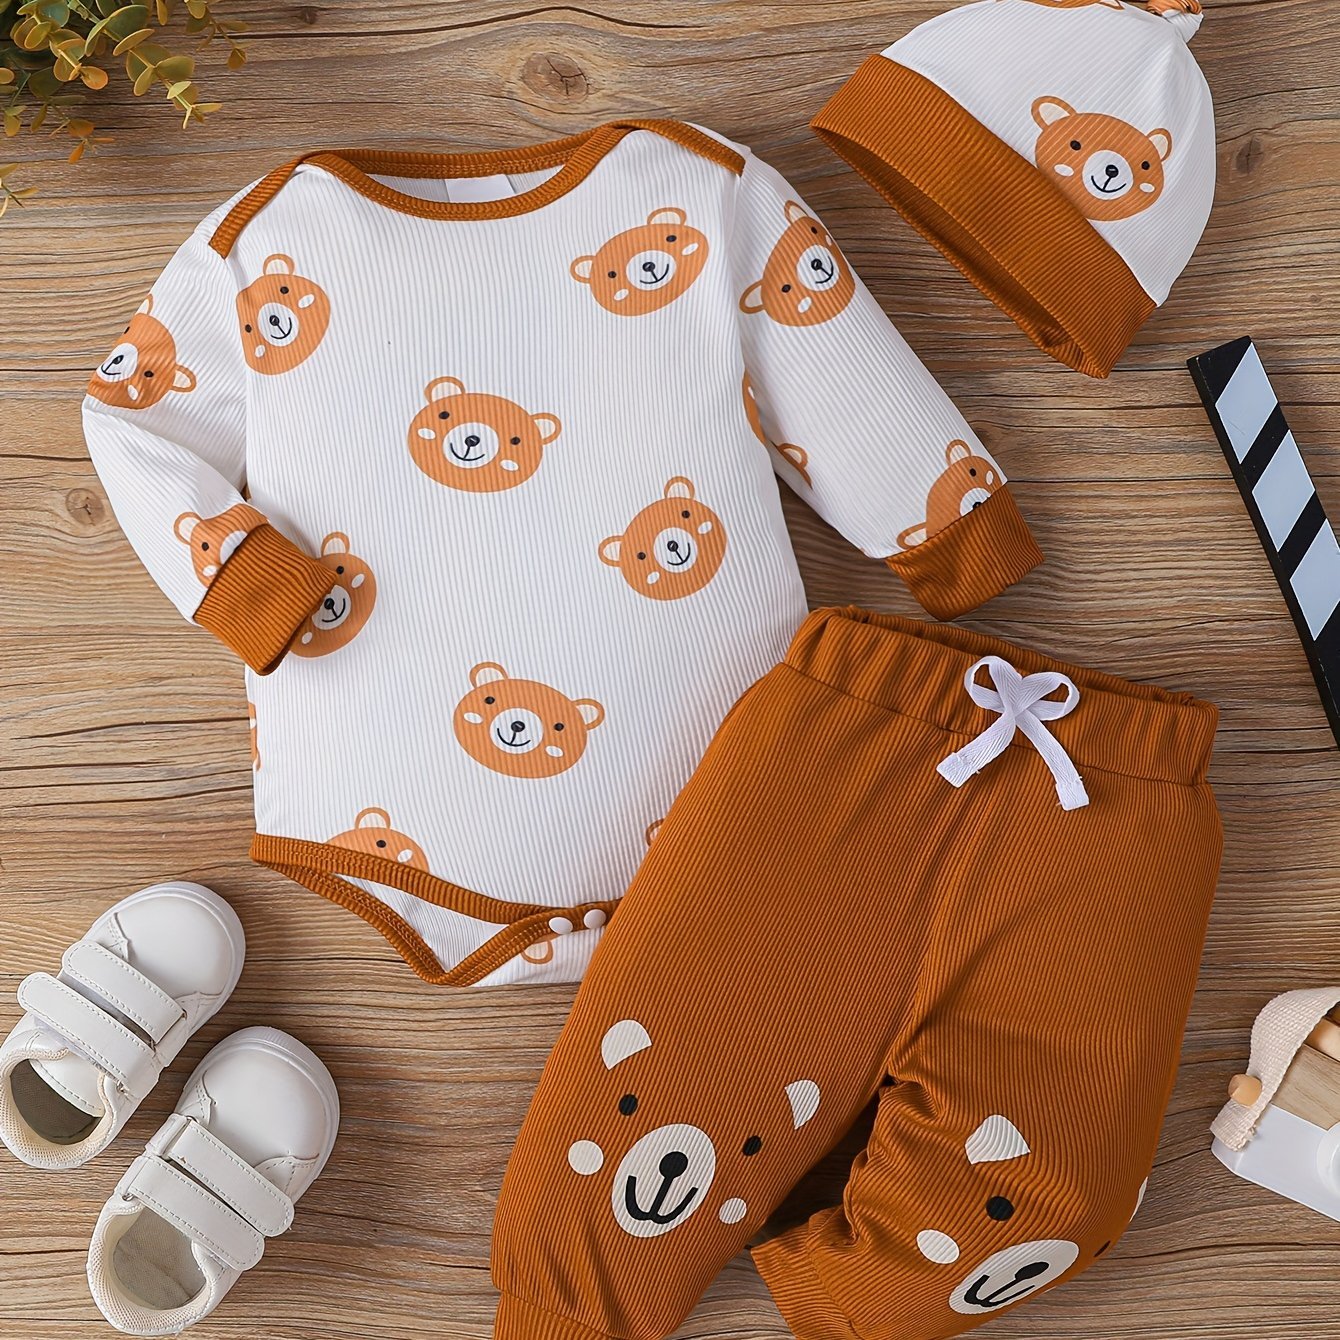 Three - Piece Newborn Set - Adorable Bear - Print Triangle Romper, Cozy Trousers & Matching Hat - Perfect Soft Ensemble for Everyday Comfort - Ammpoure Wellbeing